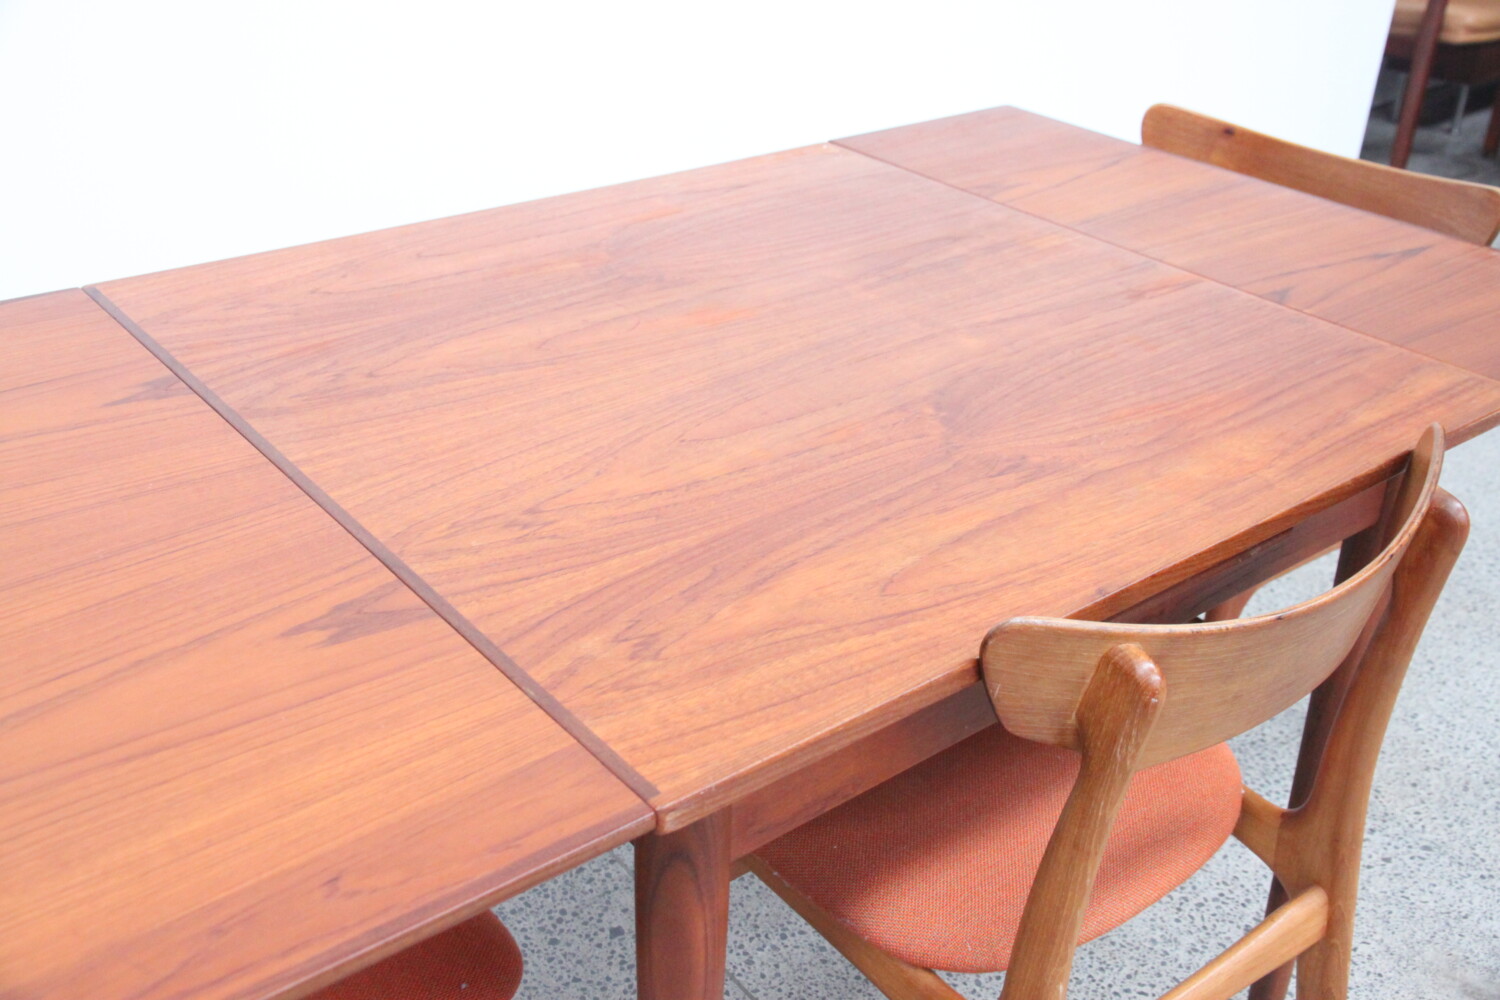 Compact Teak Table sold